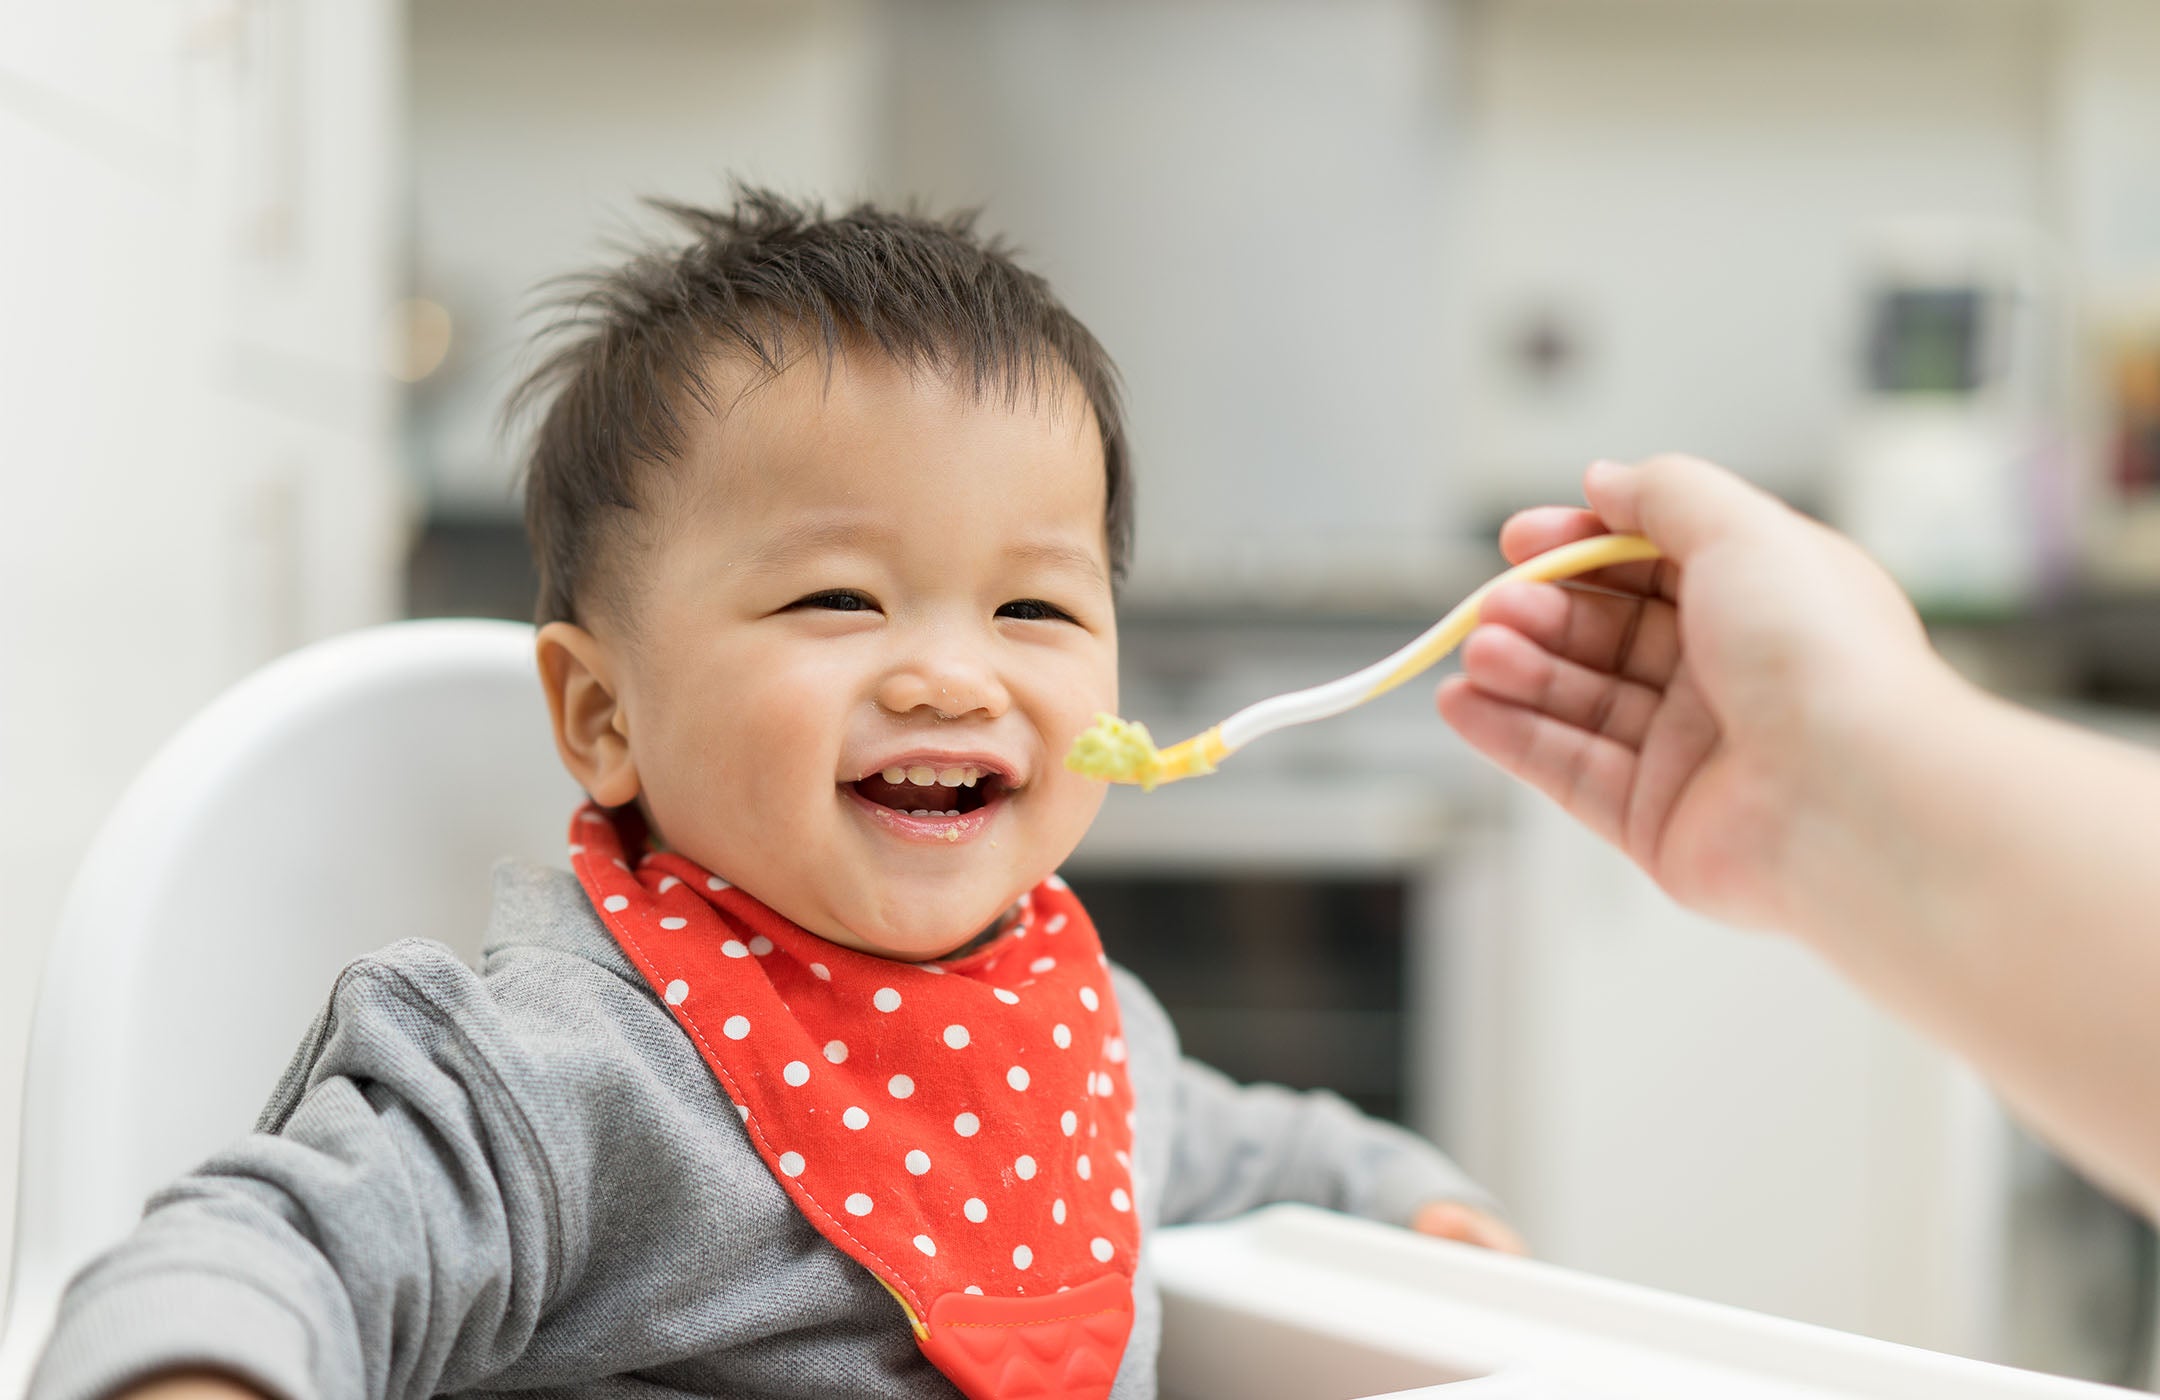 Baby's First Foods: 5 Tips for Starting Solids